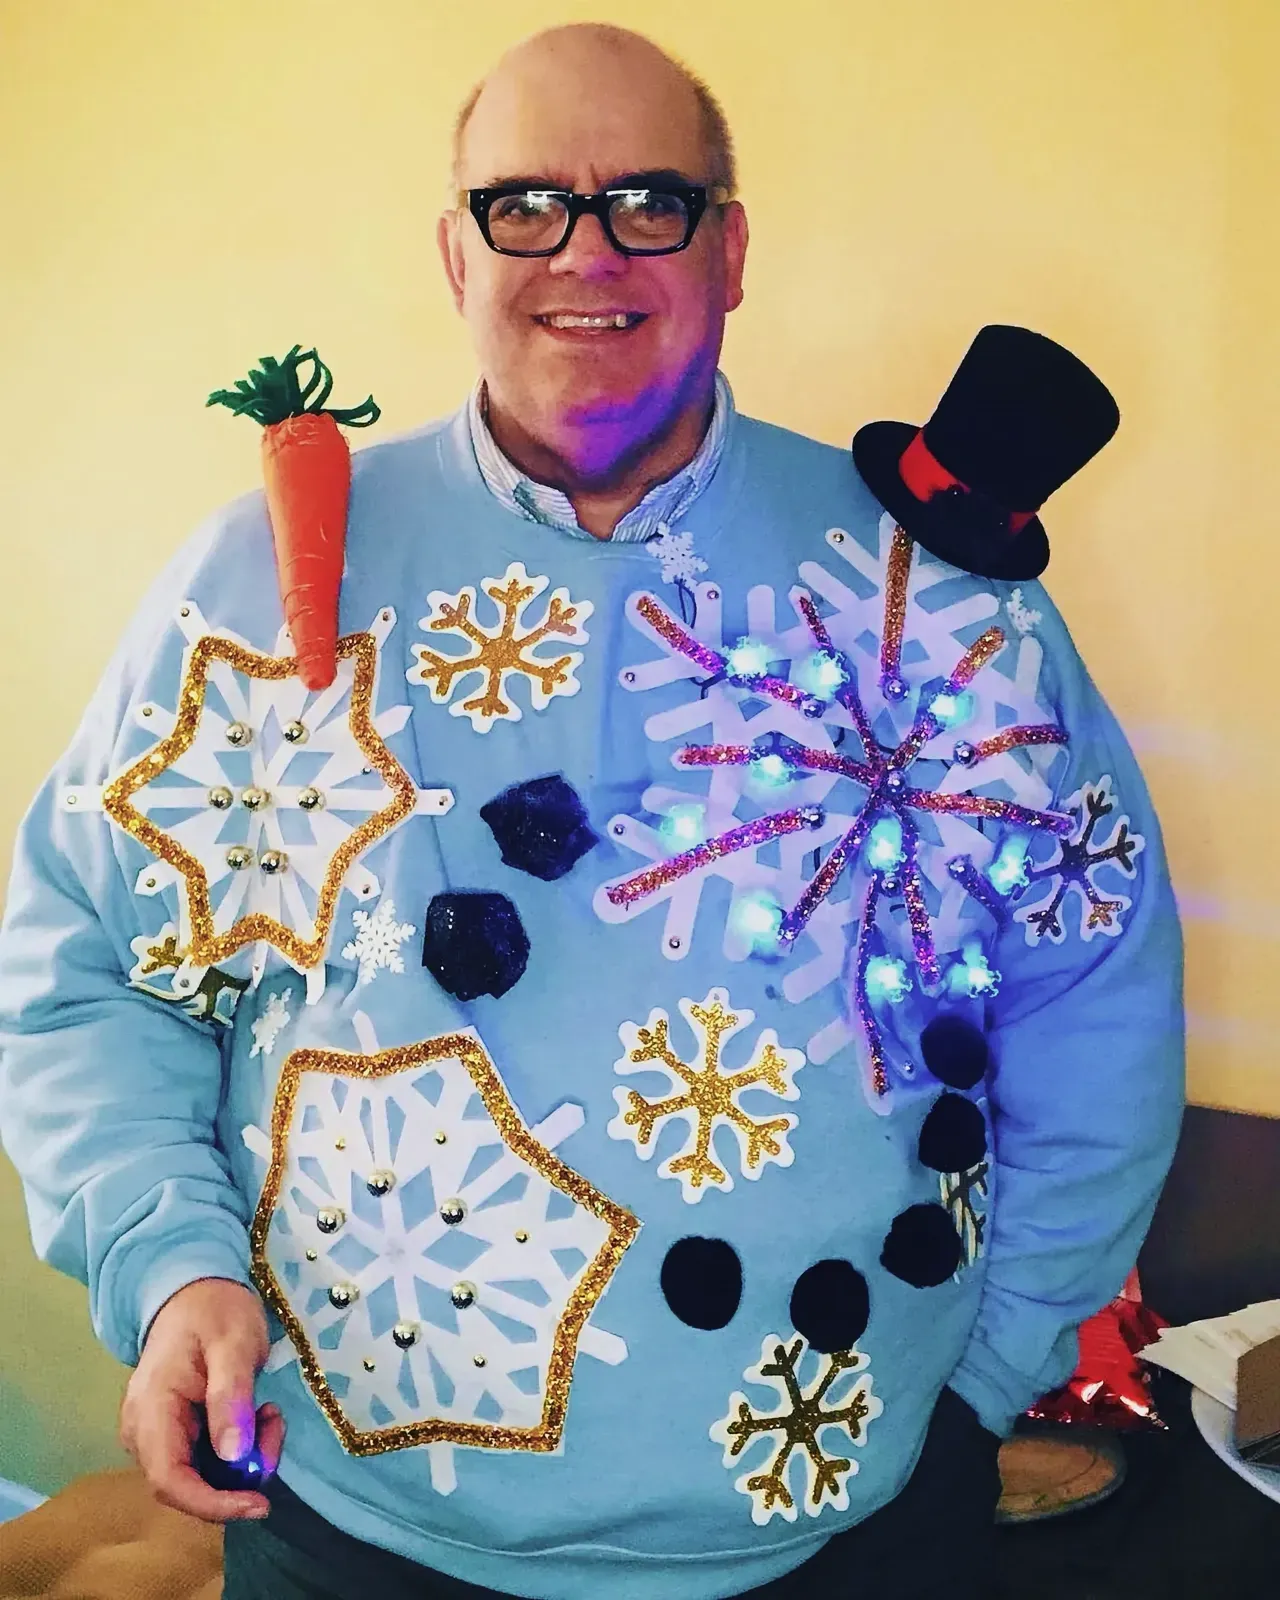 Cheerful man wearing a unique sweater adorned with snowflakes and carrots.